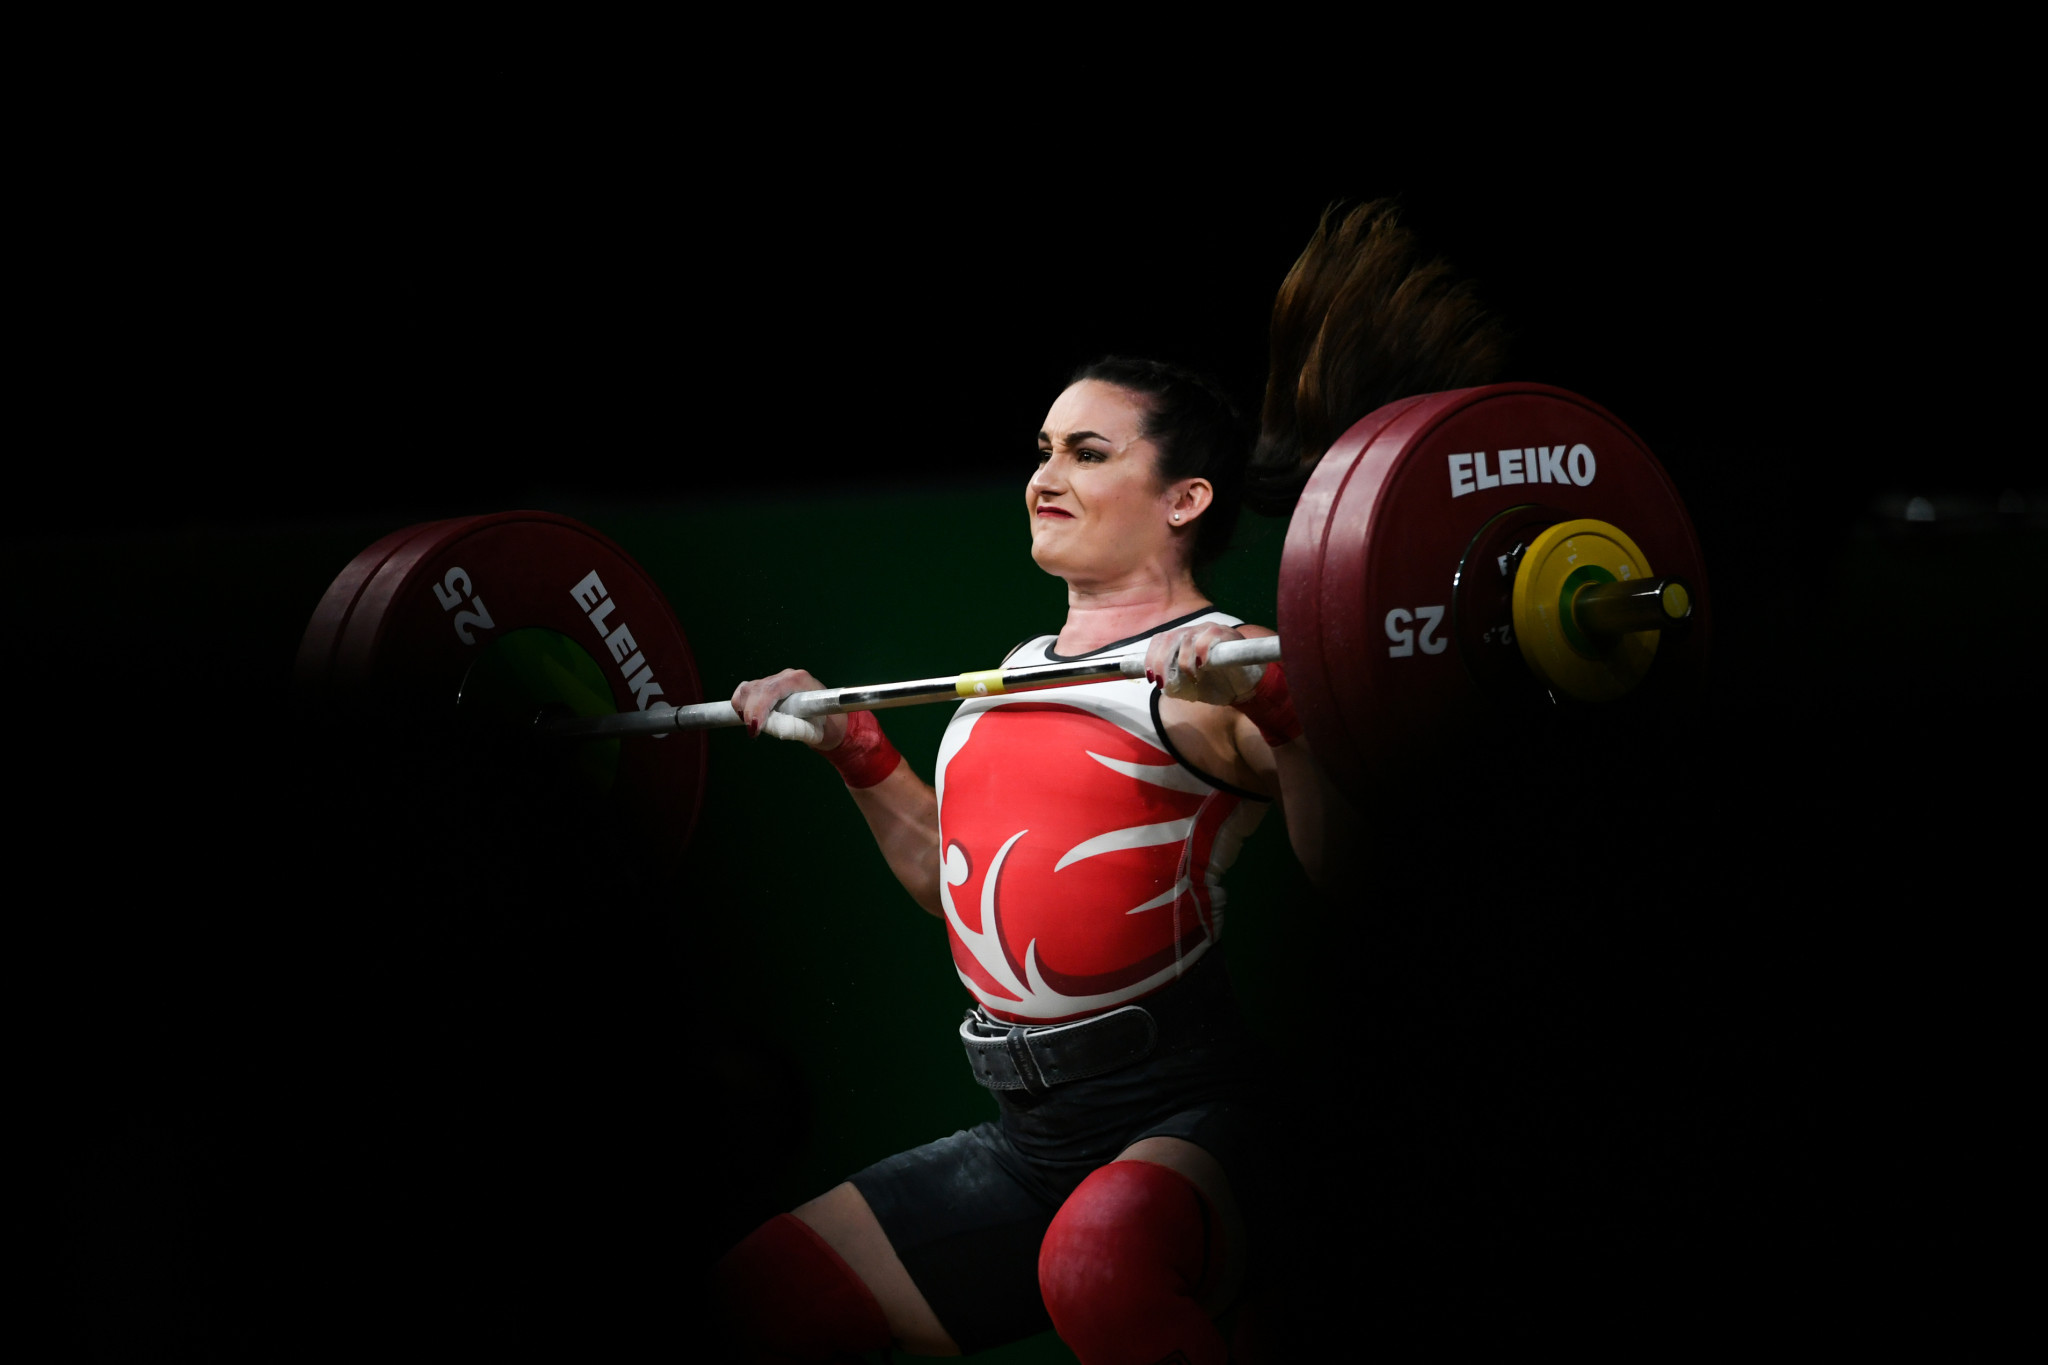 Sarah Davies became the first female British weightlifter to win a World Championship silver medal ©Getty Images